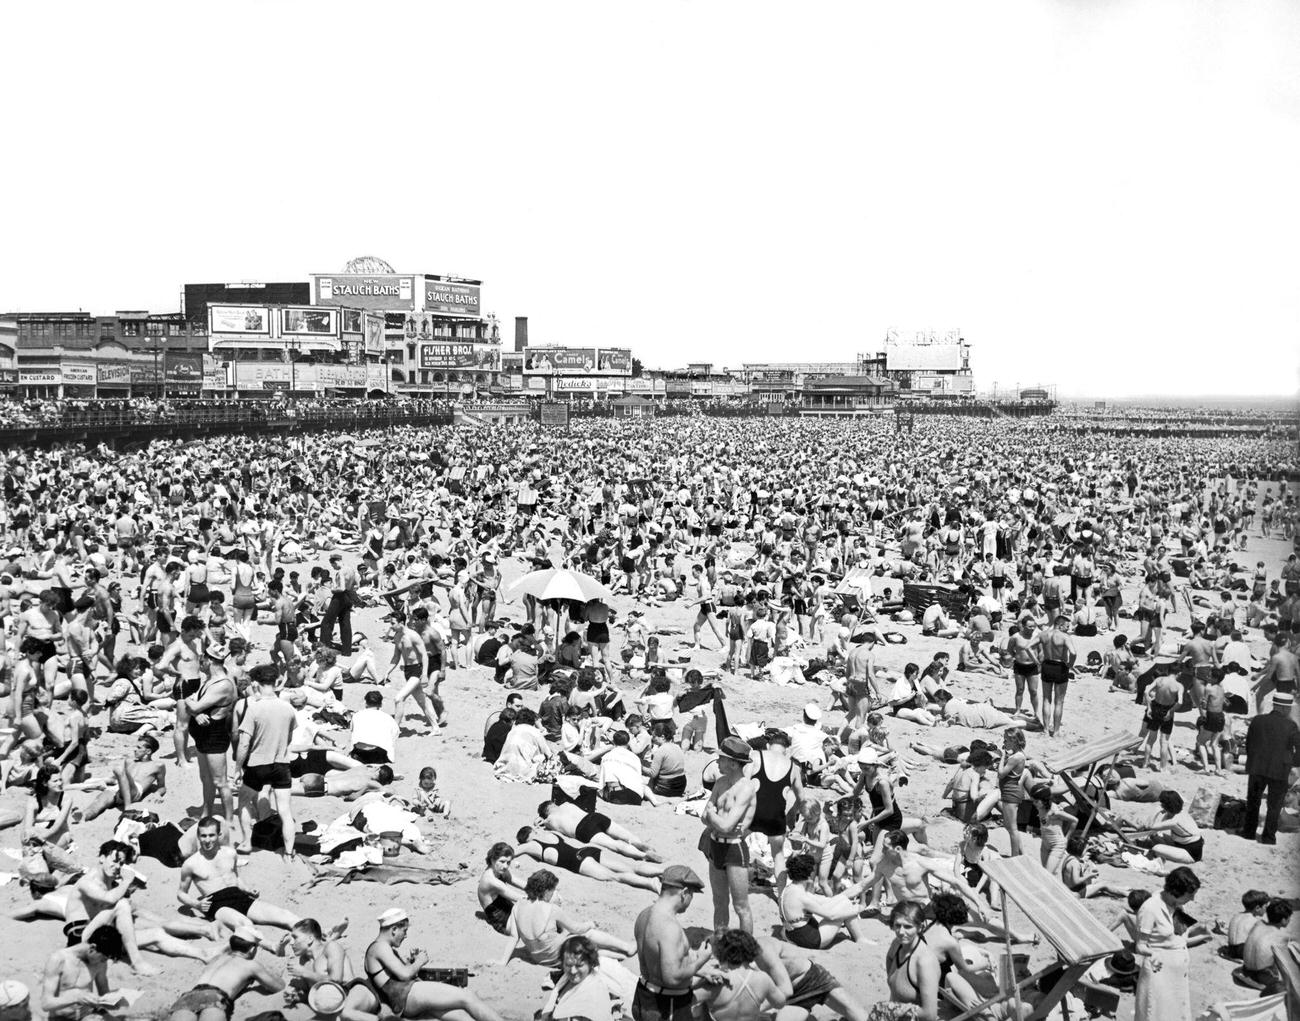 Crowds Gather On Coney Island Sands, July 1938